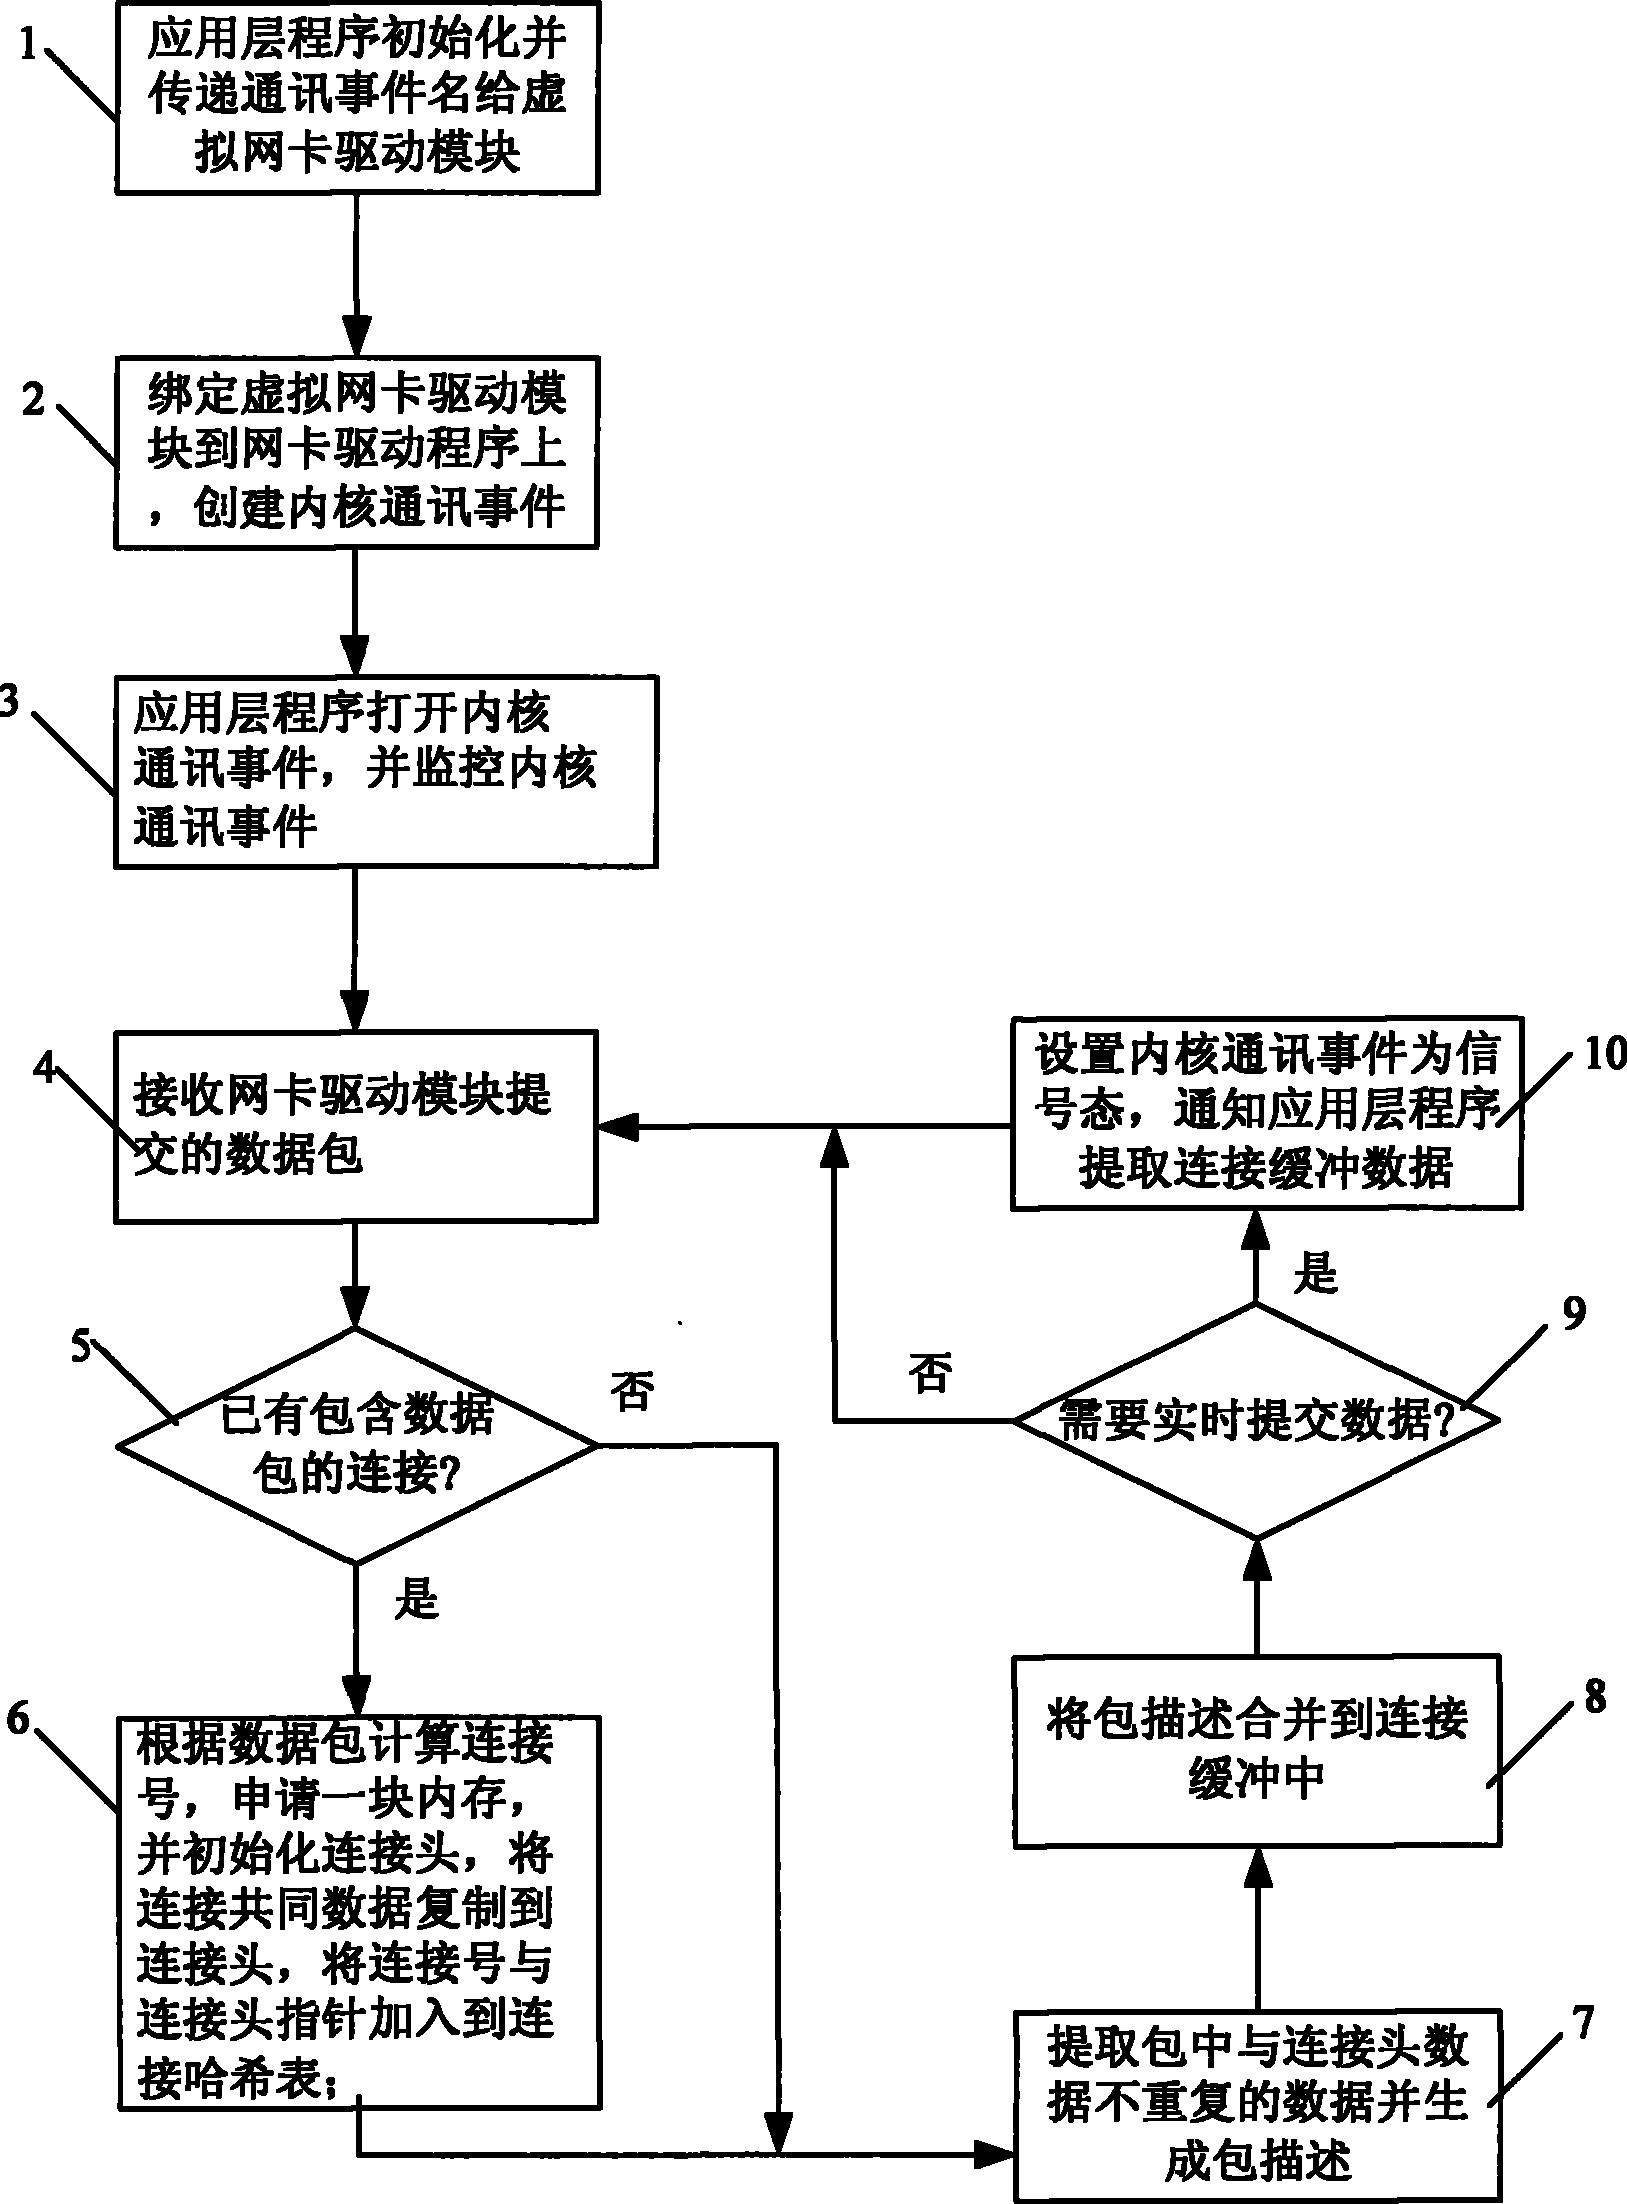 Real-time network data capture method based on connection